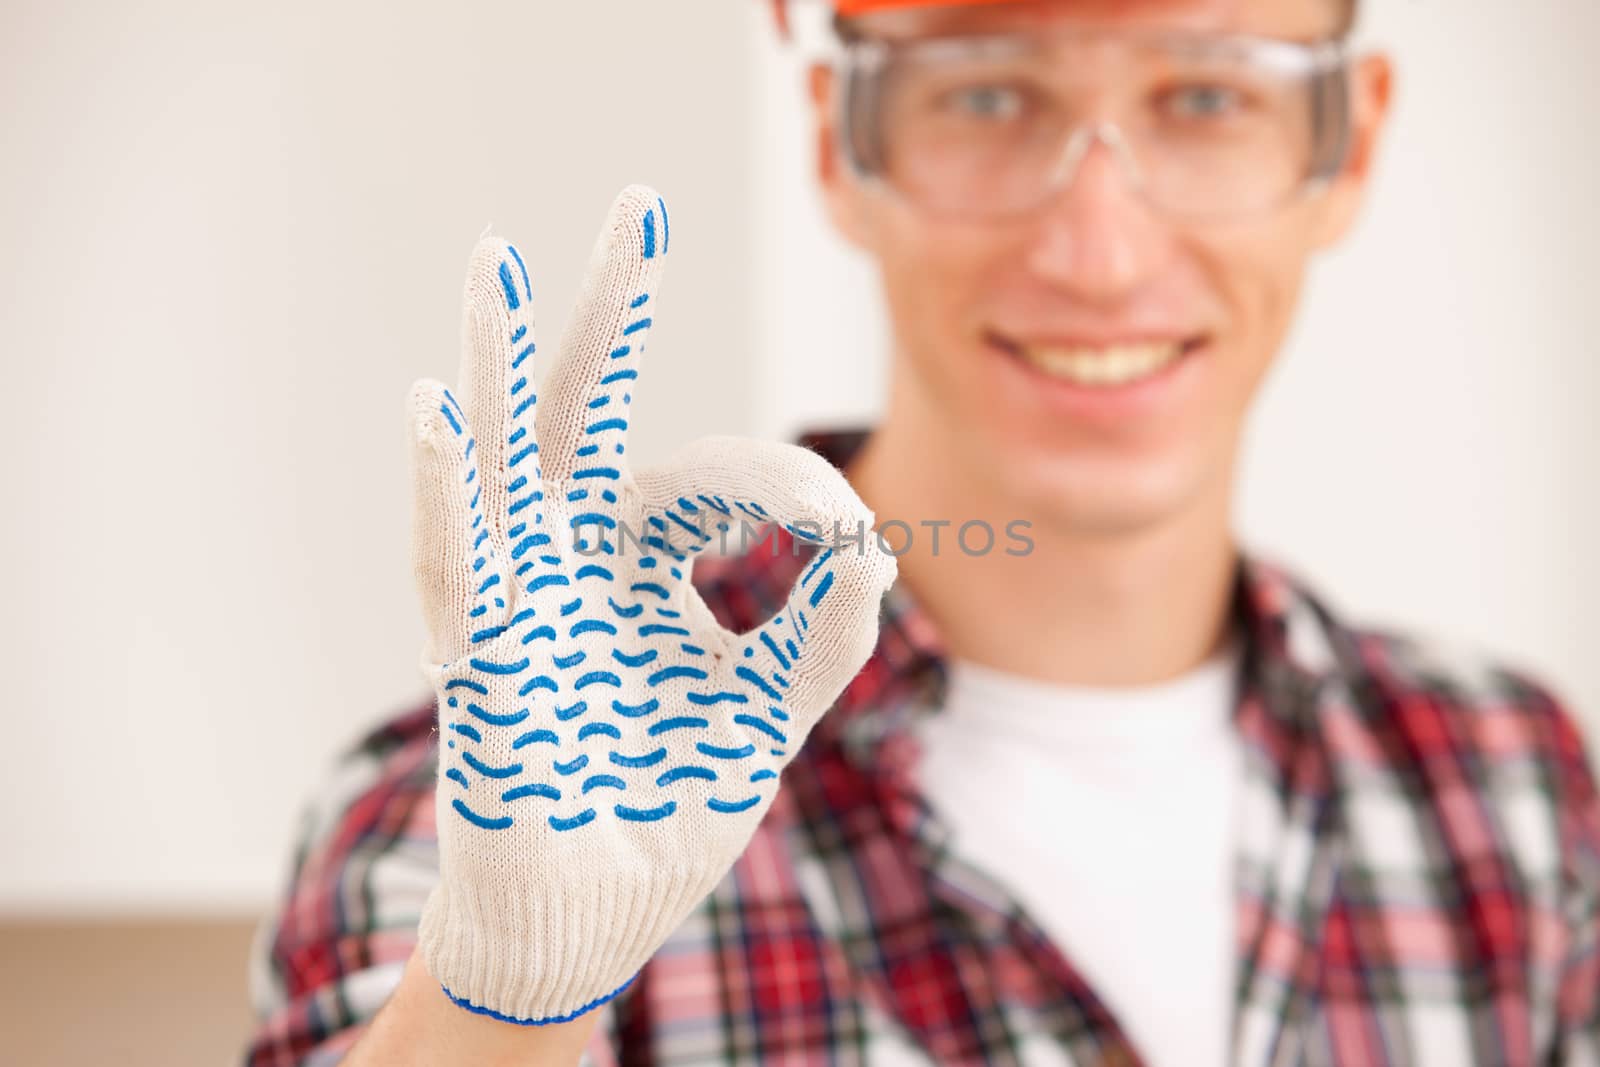 worlman making a perfect gesture with his gloved hand with focus to his hand